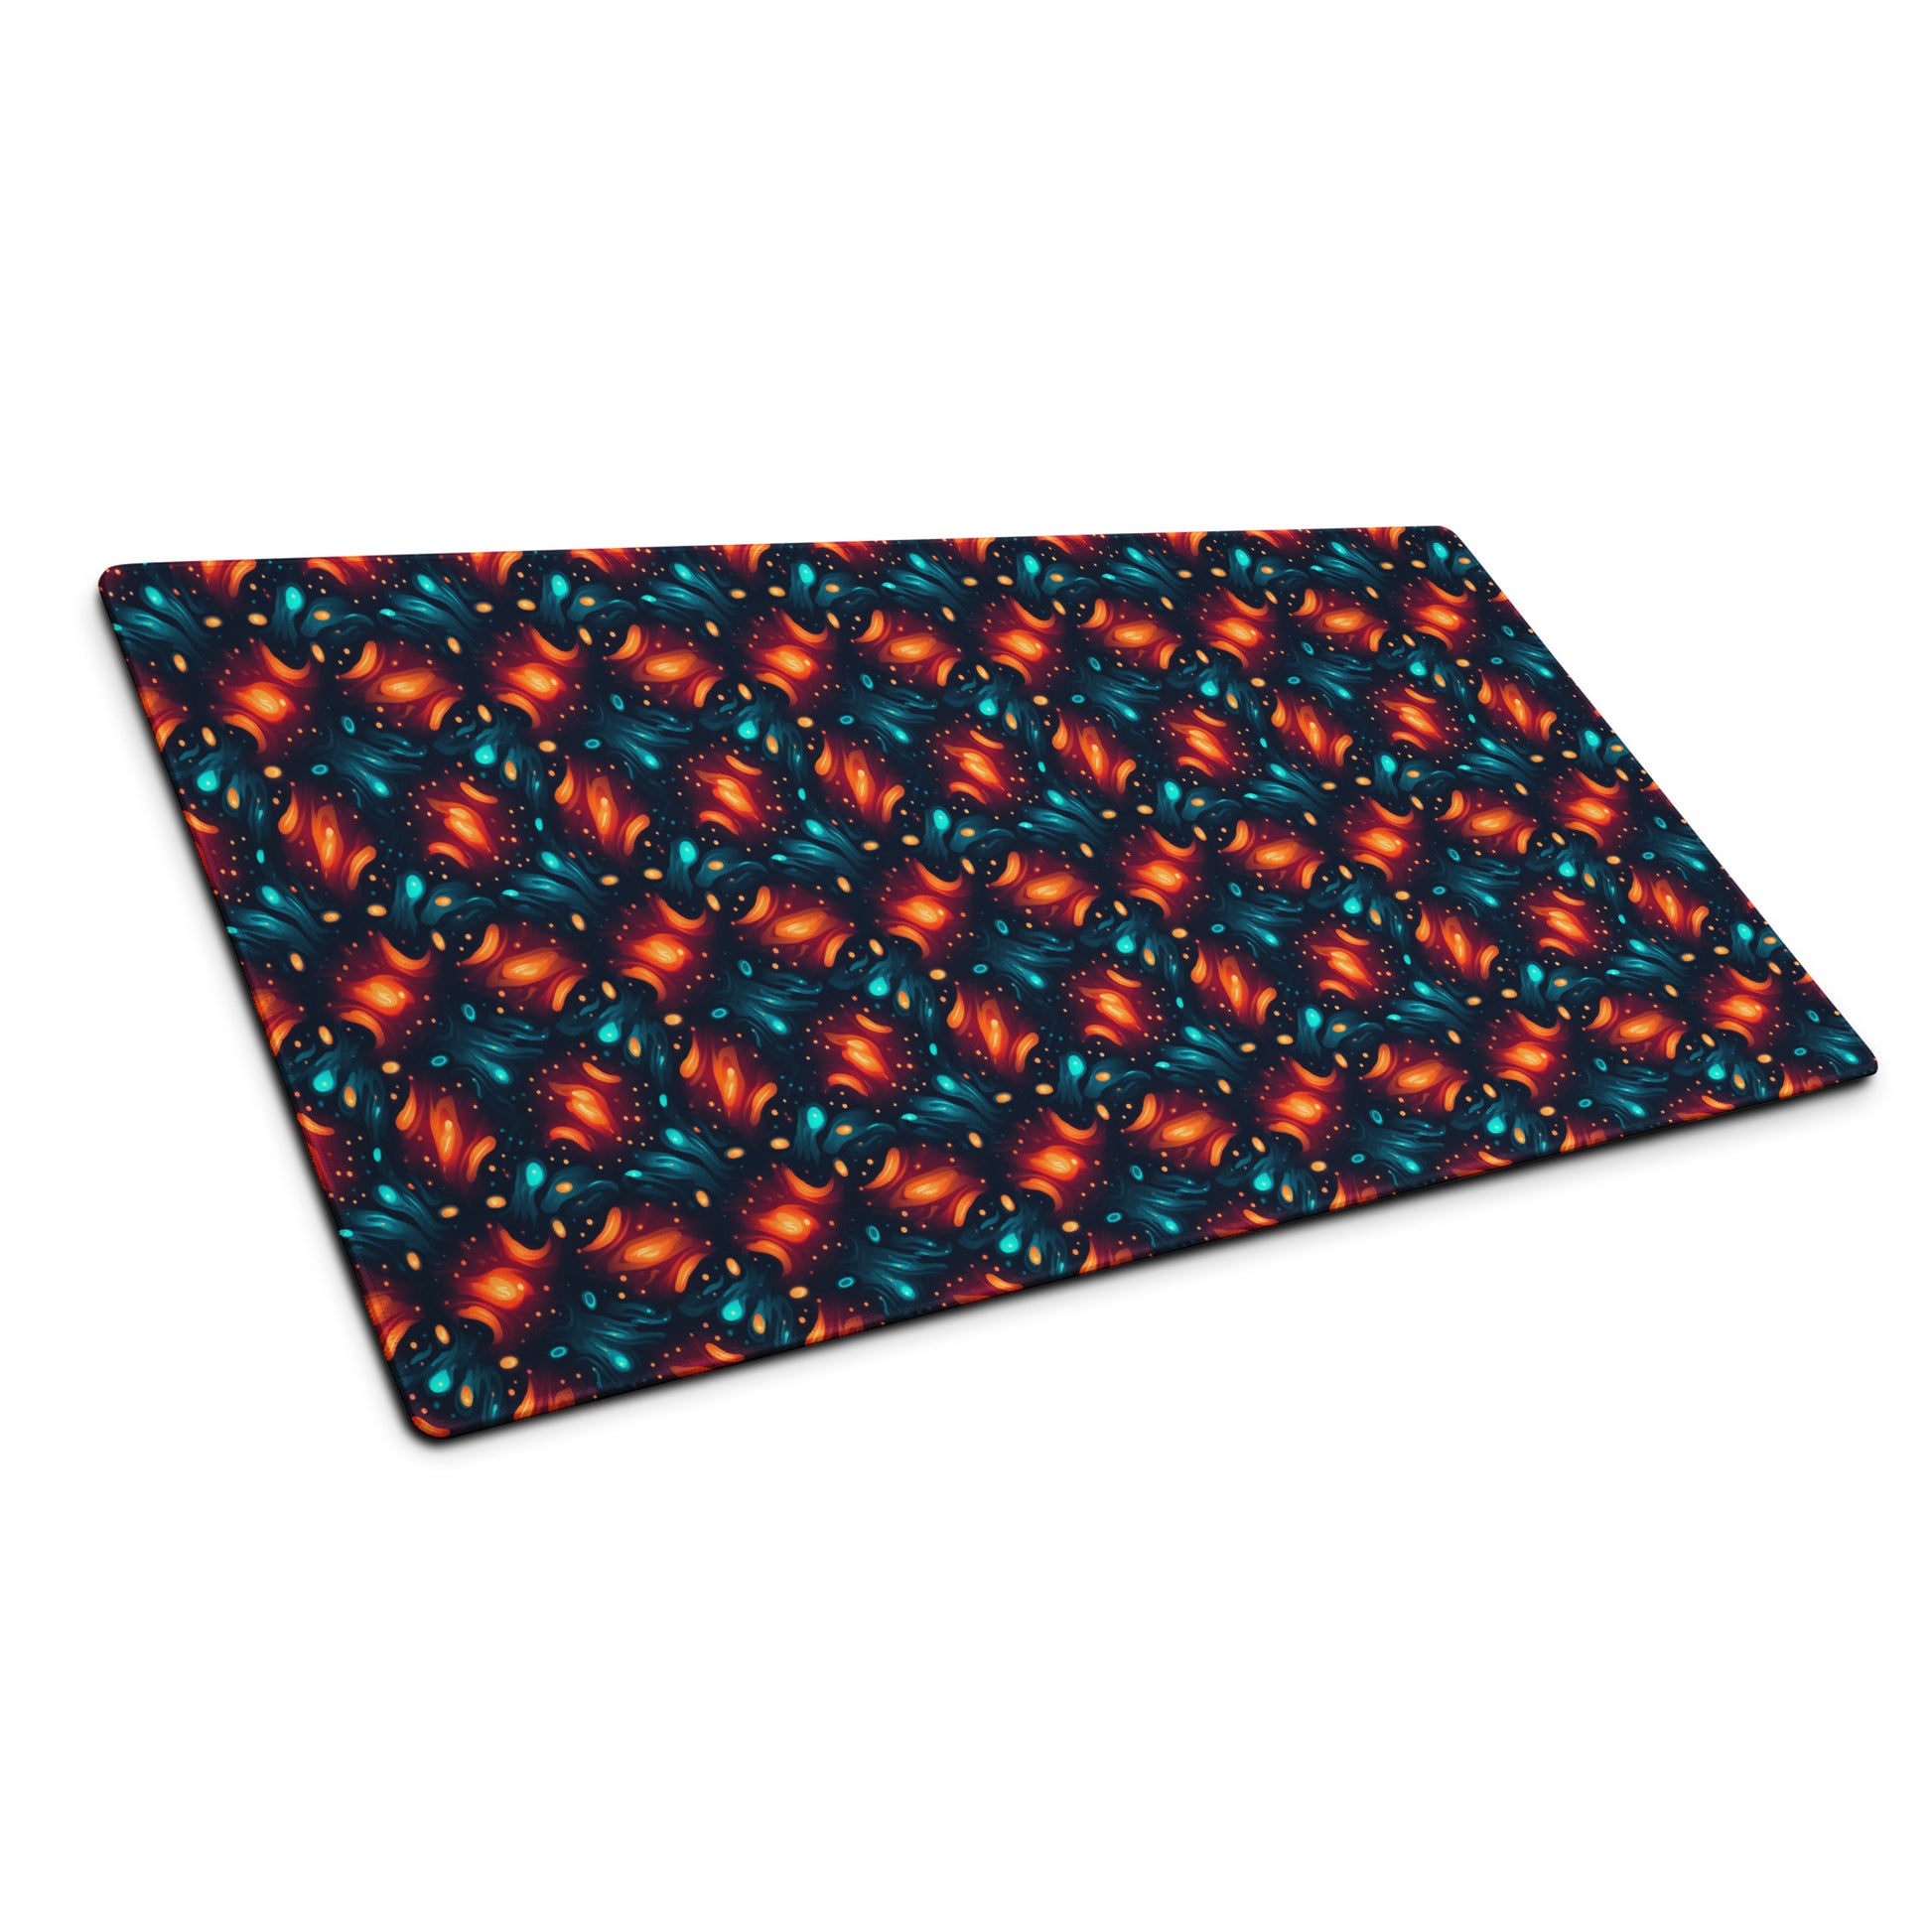 A 36" x 18" desk pad with a blue and orange abstract cross hatch pattern sitting at an angle.